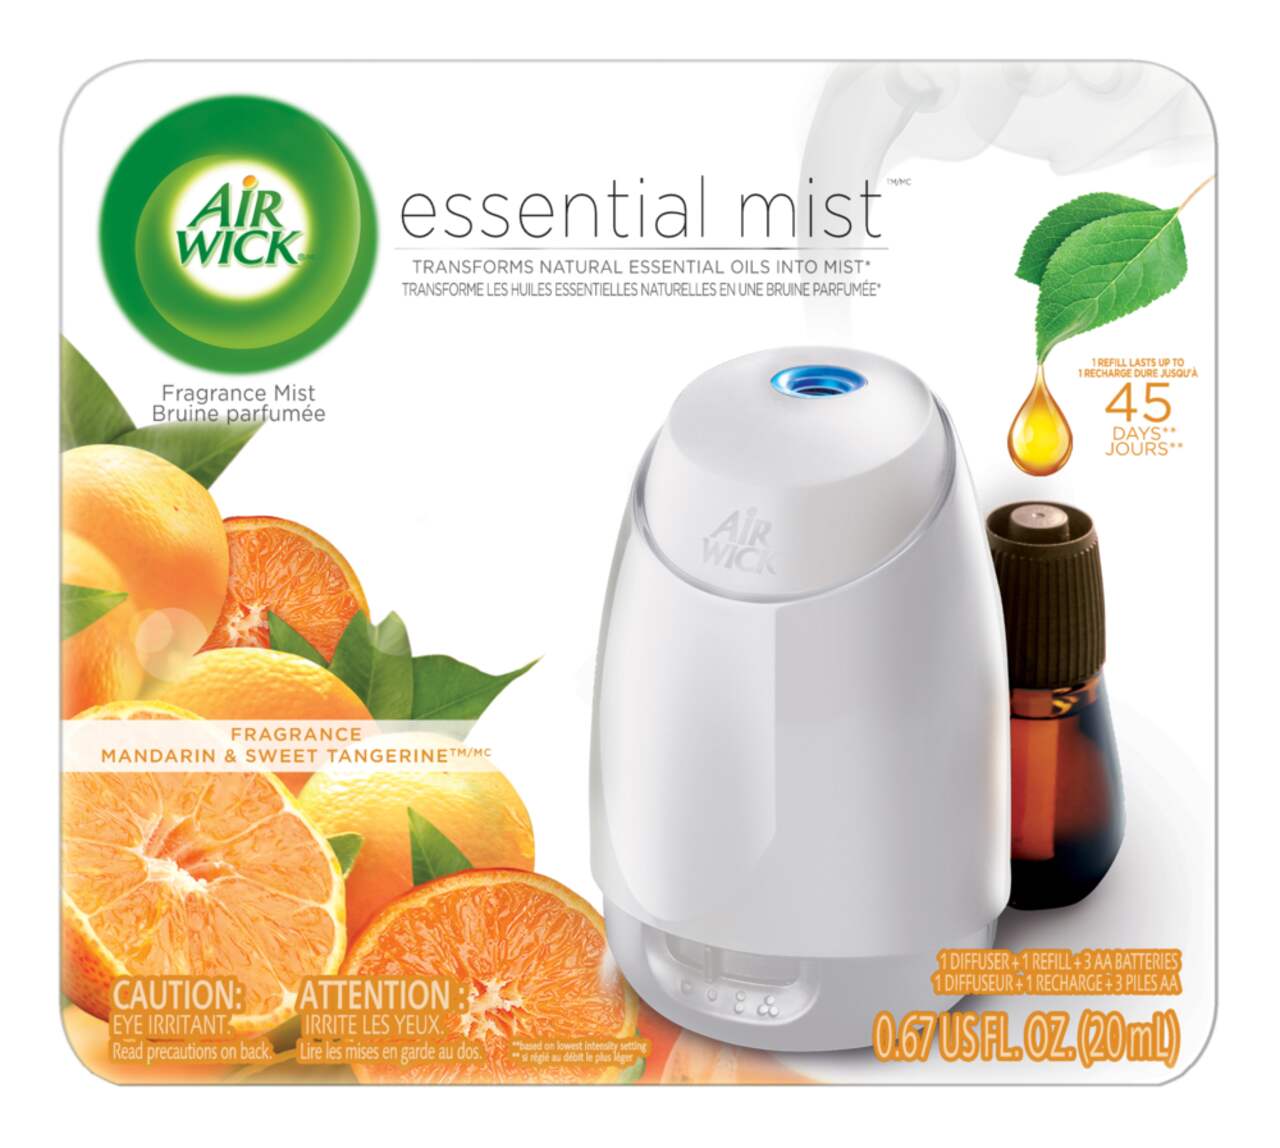 https://media-www.canadiantire.ca/product/living/cleaning/household-cleaning-solutions/1530921/air-wick-essential-mist-kit-mandarin-and-sweet-orange-a7d4789d-79b5-4c31-b811-49615953bbde.png?imdensity=1&imwidth=640&impolicy=mZoom